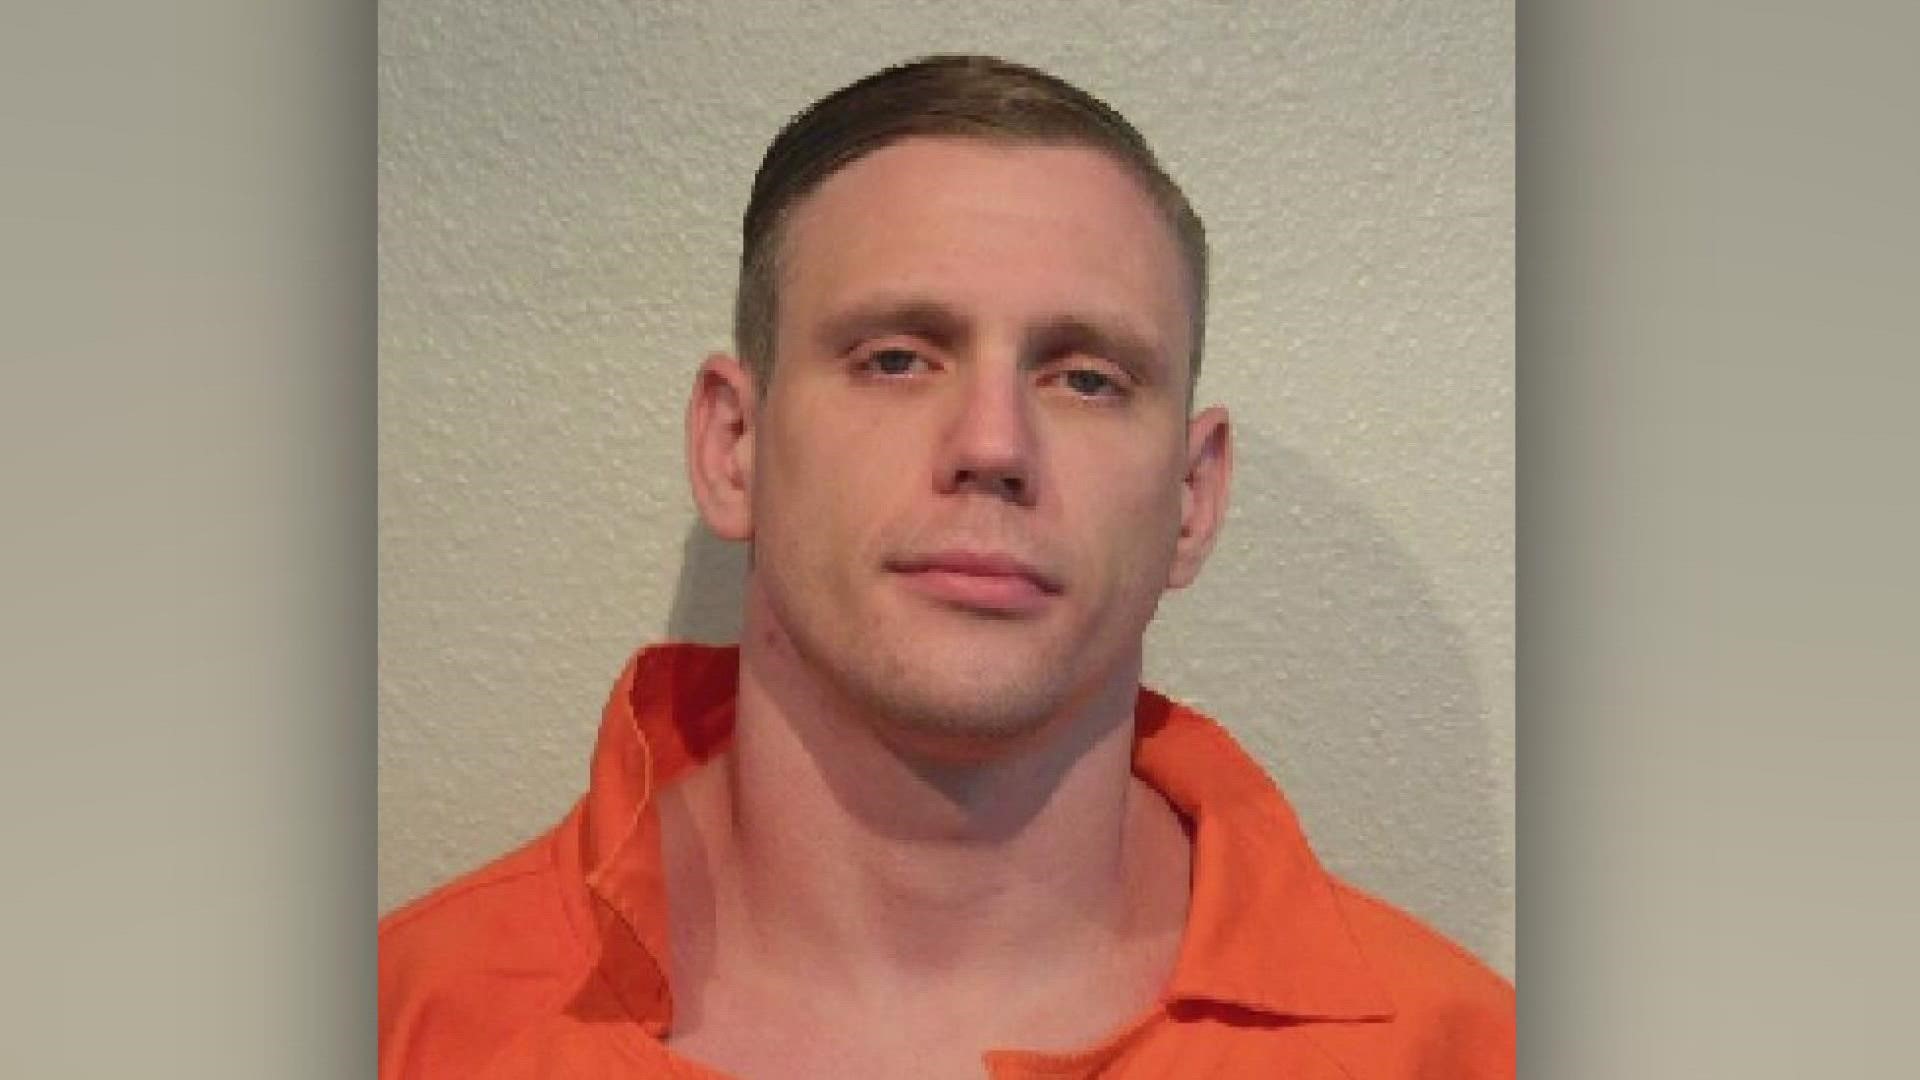 Garrett Stephen Young, 32, escaped from the corrections center over the weekend by digging under a fence.